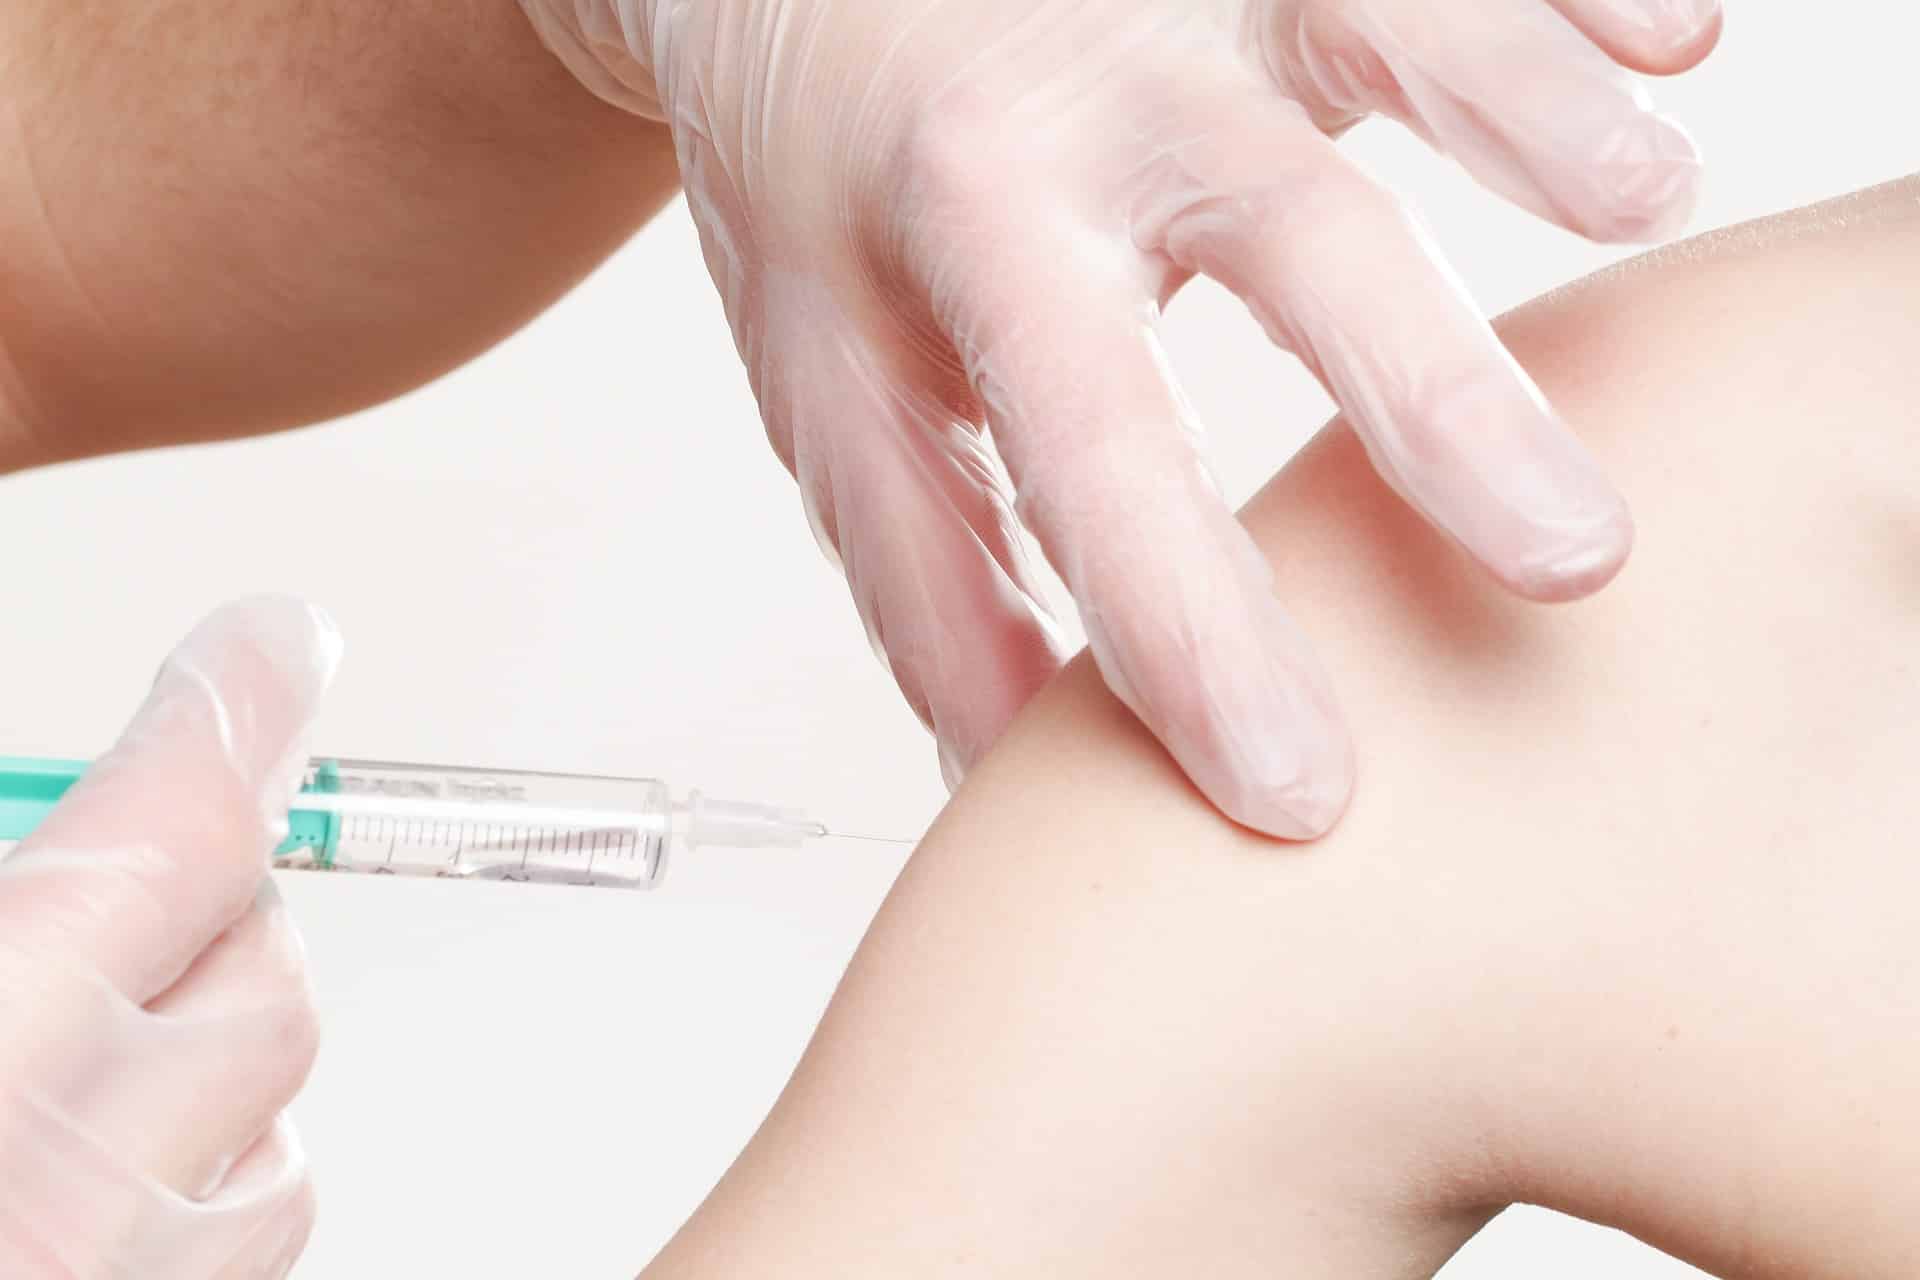 ImmuneWatch predicts how your body will react to a vaccine